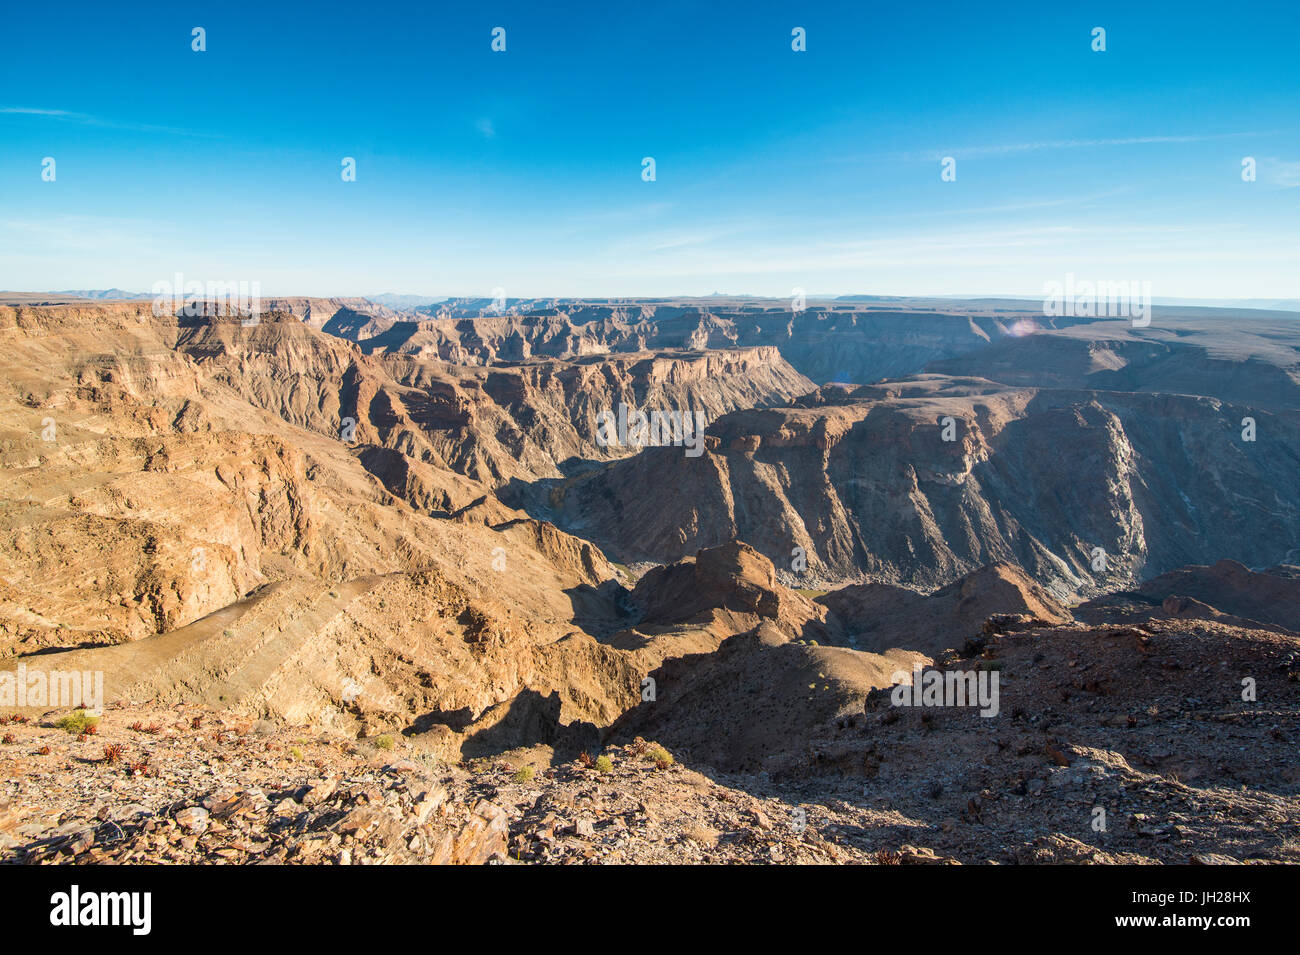 View over the Fish River Canyon, Namibia, Africa Stock Photo